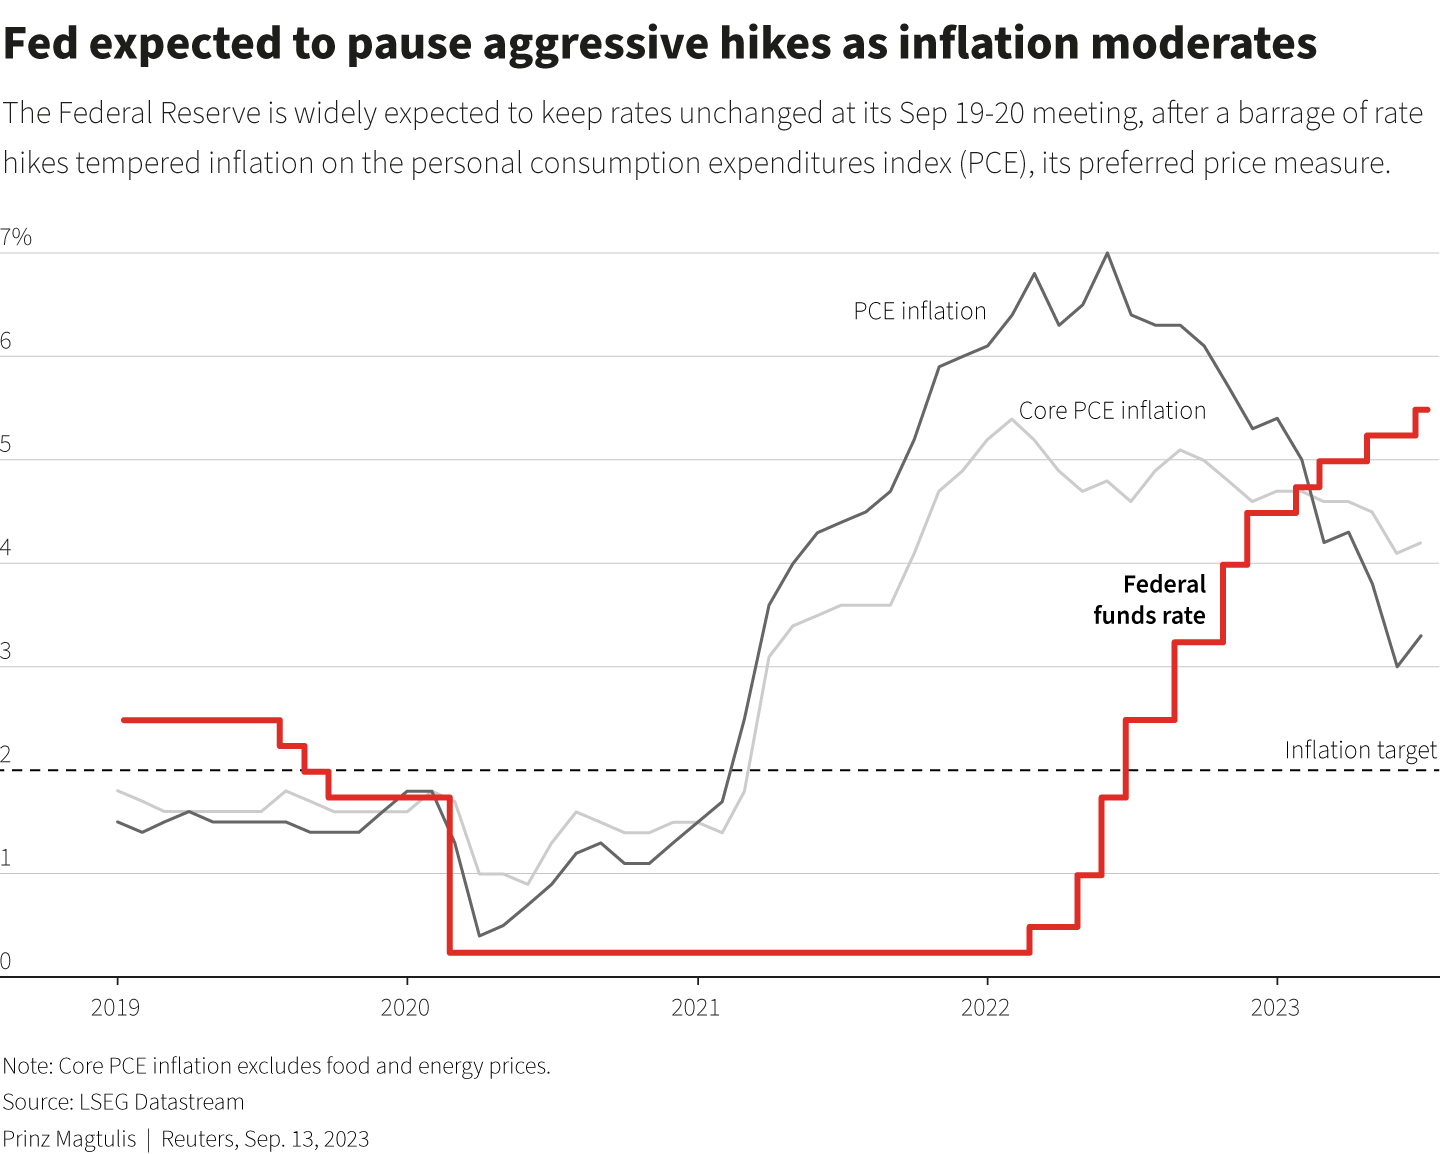 Line chart with data from LSEG Datastream show the federal funds rate, PCE inflation and core PCE inflation in the US.